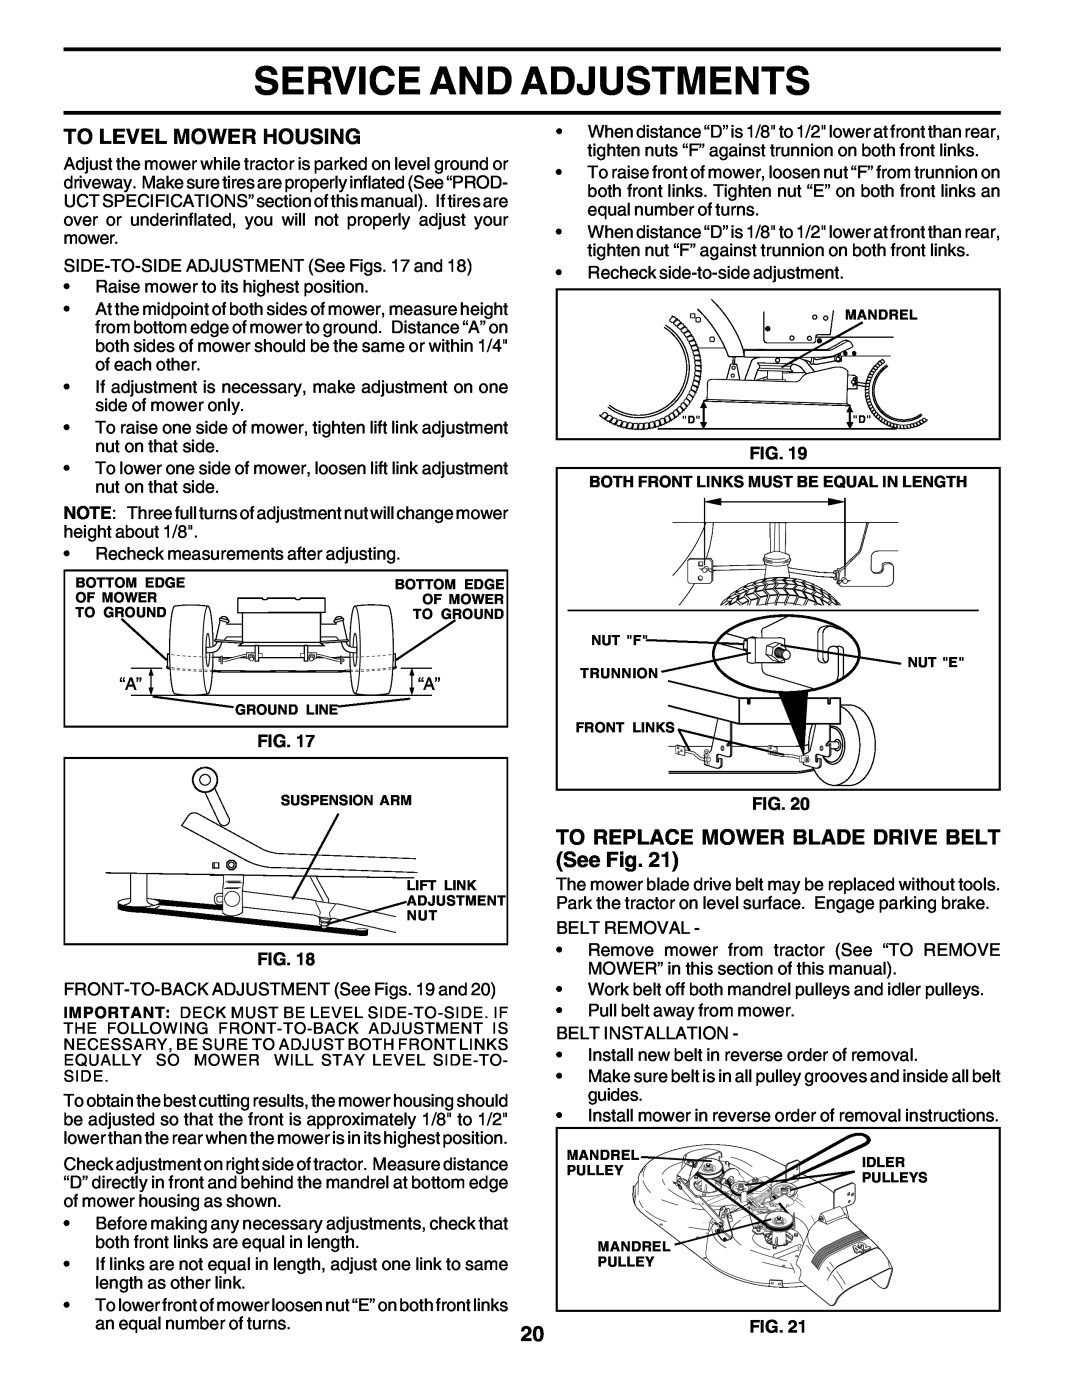 Poulan PC14542D owner manual Service And Adjustments, To Level Mower Housing, TO REPLACE MOWER BLADE DRIVE BELT See Fig 